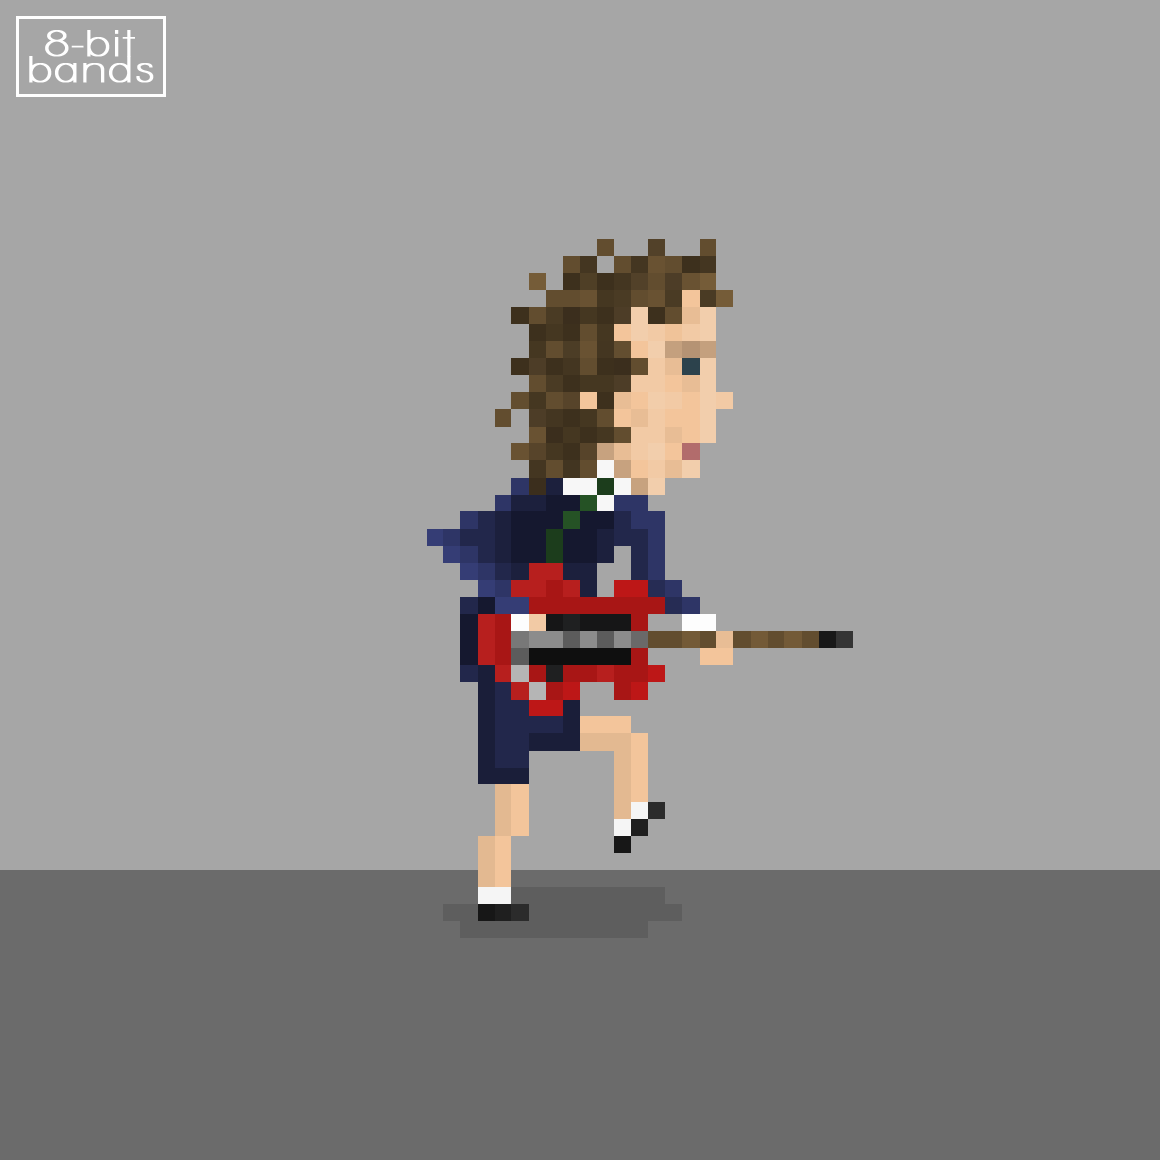 8-bit Bands on Twitter: "#AngusYoung in #8bits! #ACDC #pixelart https